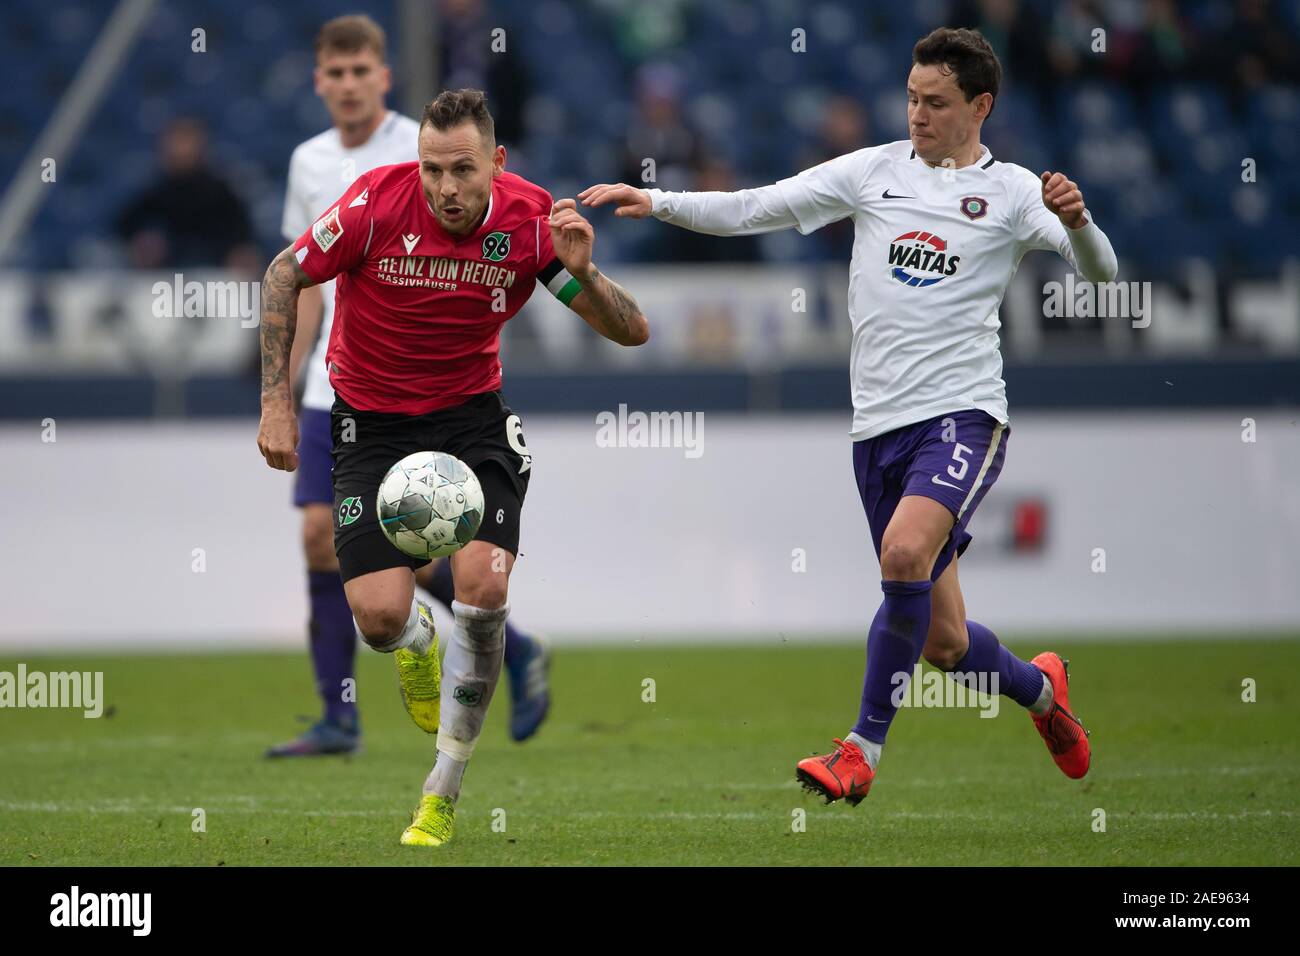 Hanover, Germany. 07th Dec, 2019. Soccer: 2nd Bundesliga, Hannover 96 - Erzgebirge Aue, 16th matchday in the HDI-Arena. Hanover's Marvin Bakalorz (l) plays against Aues Clemens Fandrich. Credit: Swen Pförtner/dpa - IMPORTANT NOTE: In accordance with the requirements of the DFL Deutsche Fußball Liga or the DFB Deutscher Fußball-Bund, it is prohibited to use or have used photographs taken in the stadium and/or the match in the form of sequence images and/or video-like photo sequences./dpa/Alamy Live News Stock Photo